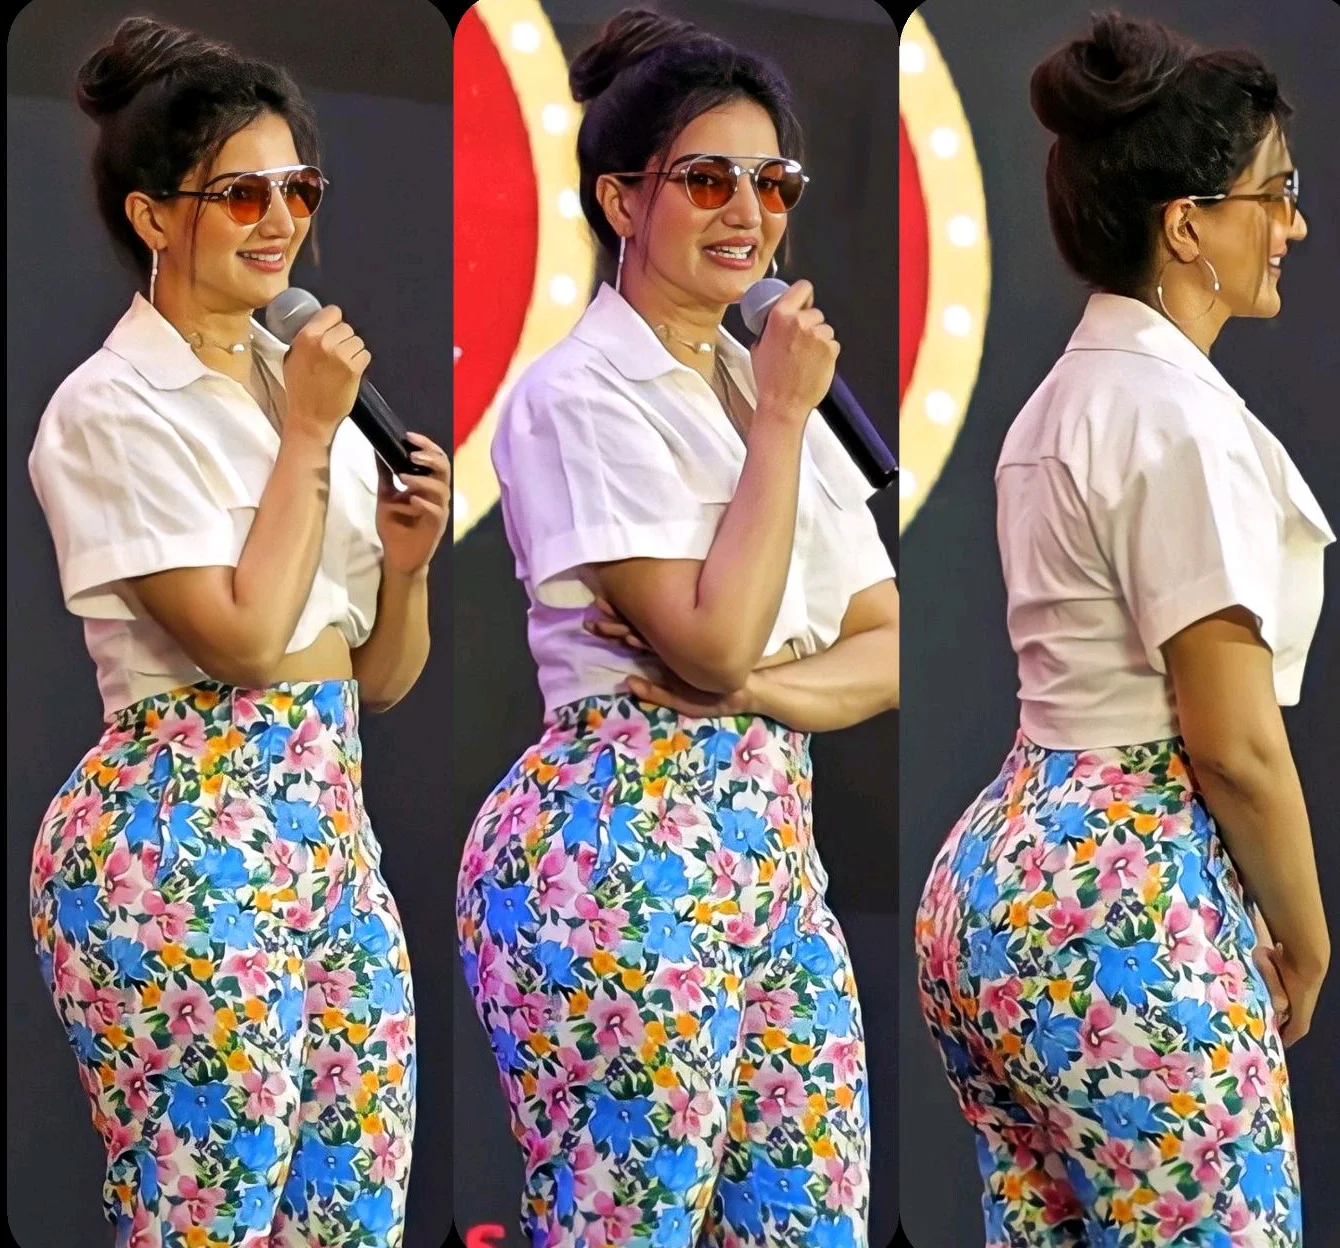 Honey Rose Showed her Big Ass You can see the Hot and Curvy body figure of Honey Rose, Honey Rose hottest looks, Honey Rose hot, Honey Rose sexy, Honey Rose sexy Butt, Honey Rose huge Ass, Honey Rose sexy curvy body figure, Honey Rose viral looks